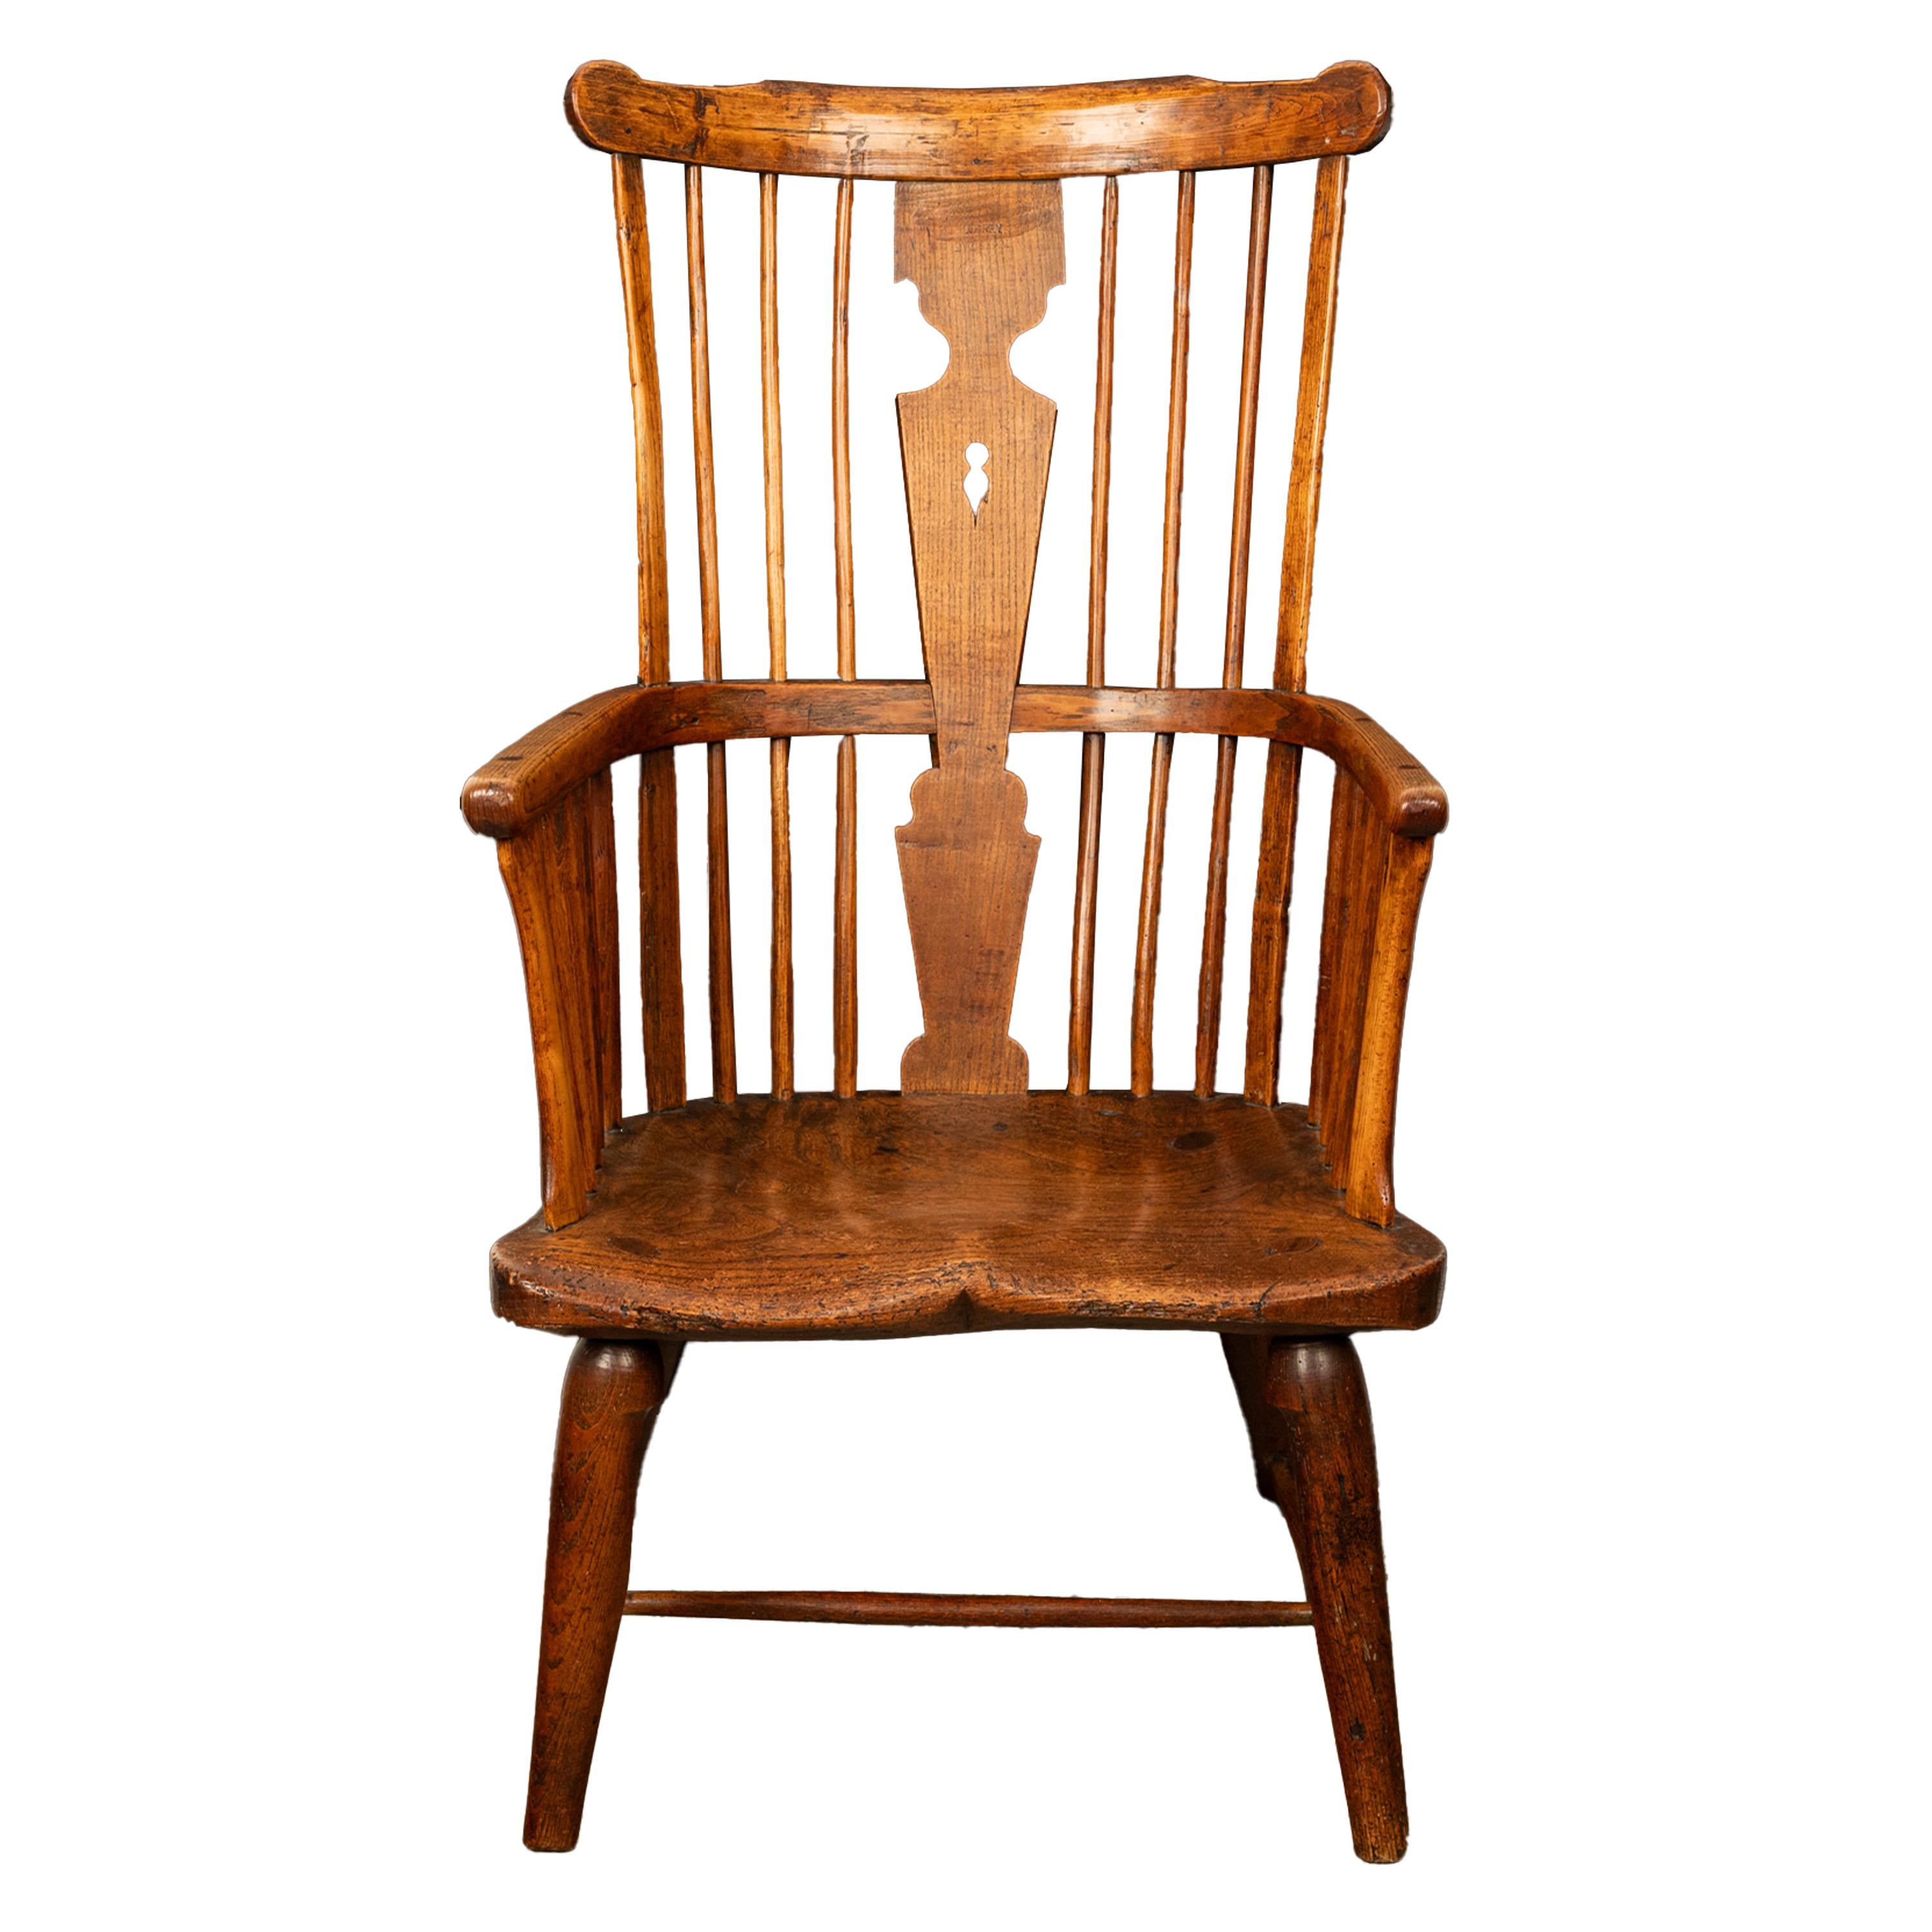 An important antique earliest documented Windsor chair by Kerry of Evesham, 1793.
The high comb back chair is made from ash & elm, the spindled back with a shaped top splat, to the center of the chair is a pierced 'keyhole' shape, the chair has a